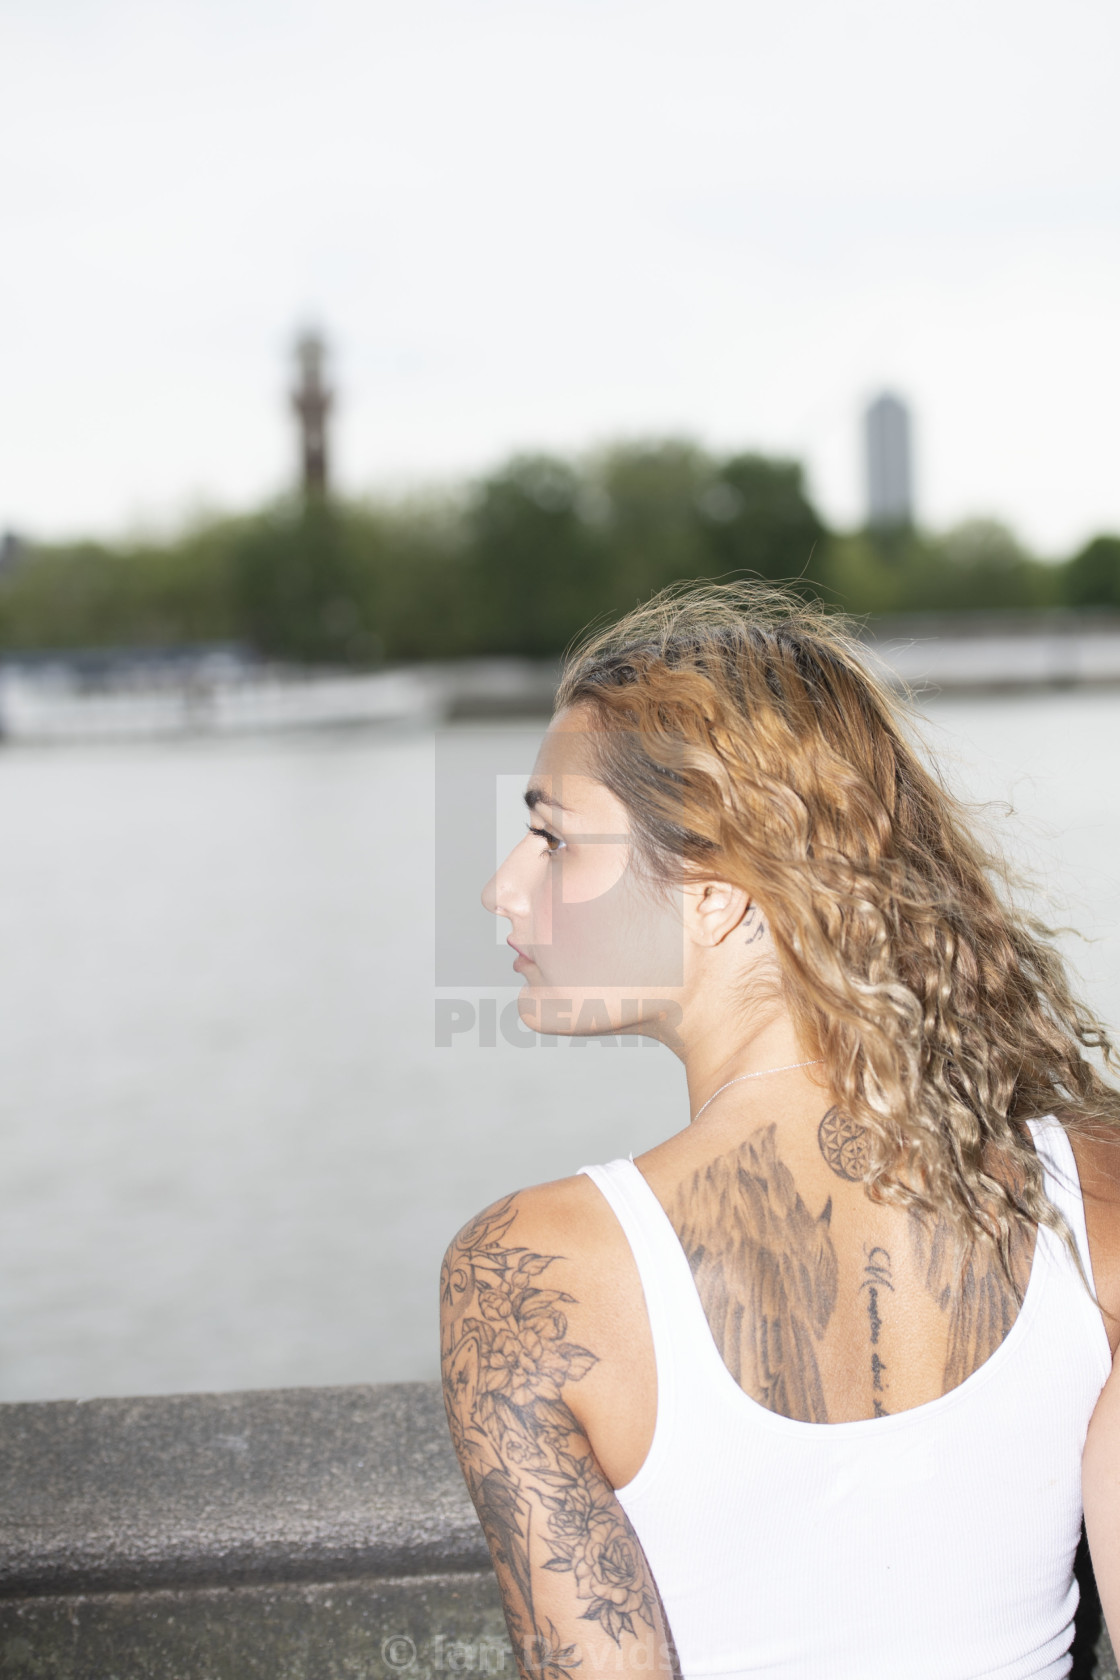 "A girl looks out over the Thames" stock image